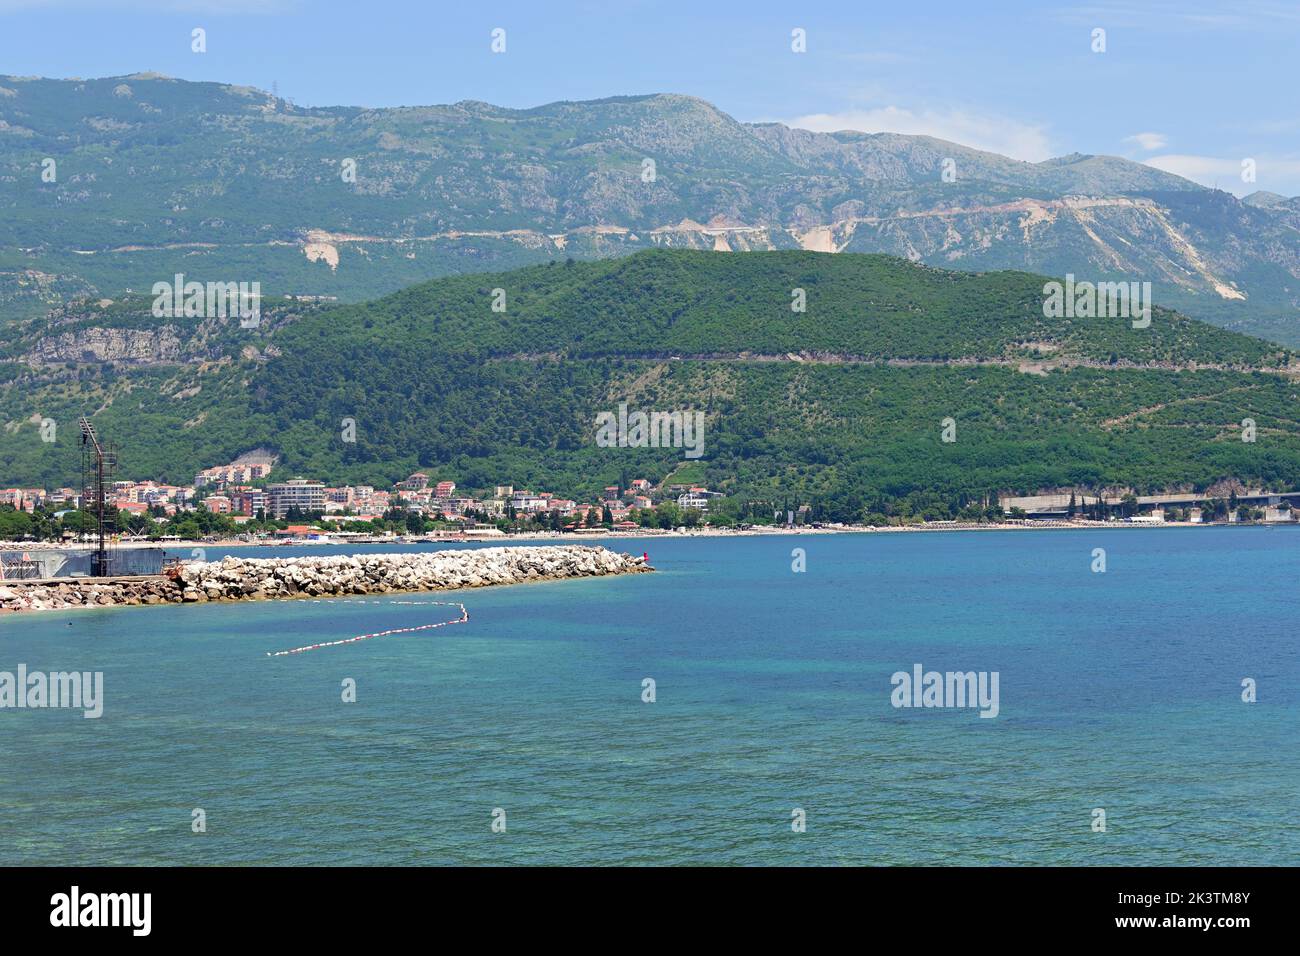 The Montenegrin coast seen from the old town of Budva. Montenegro Stock Photo